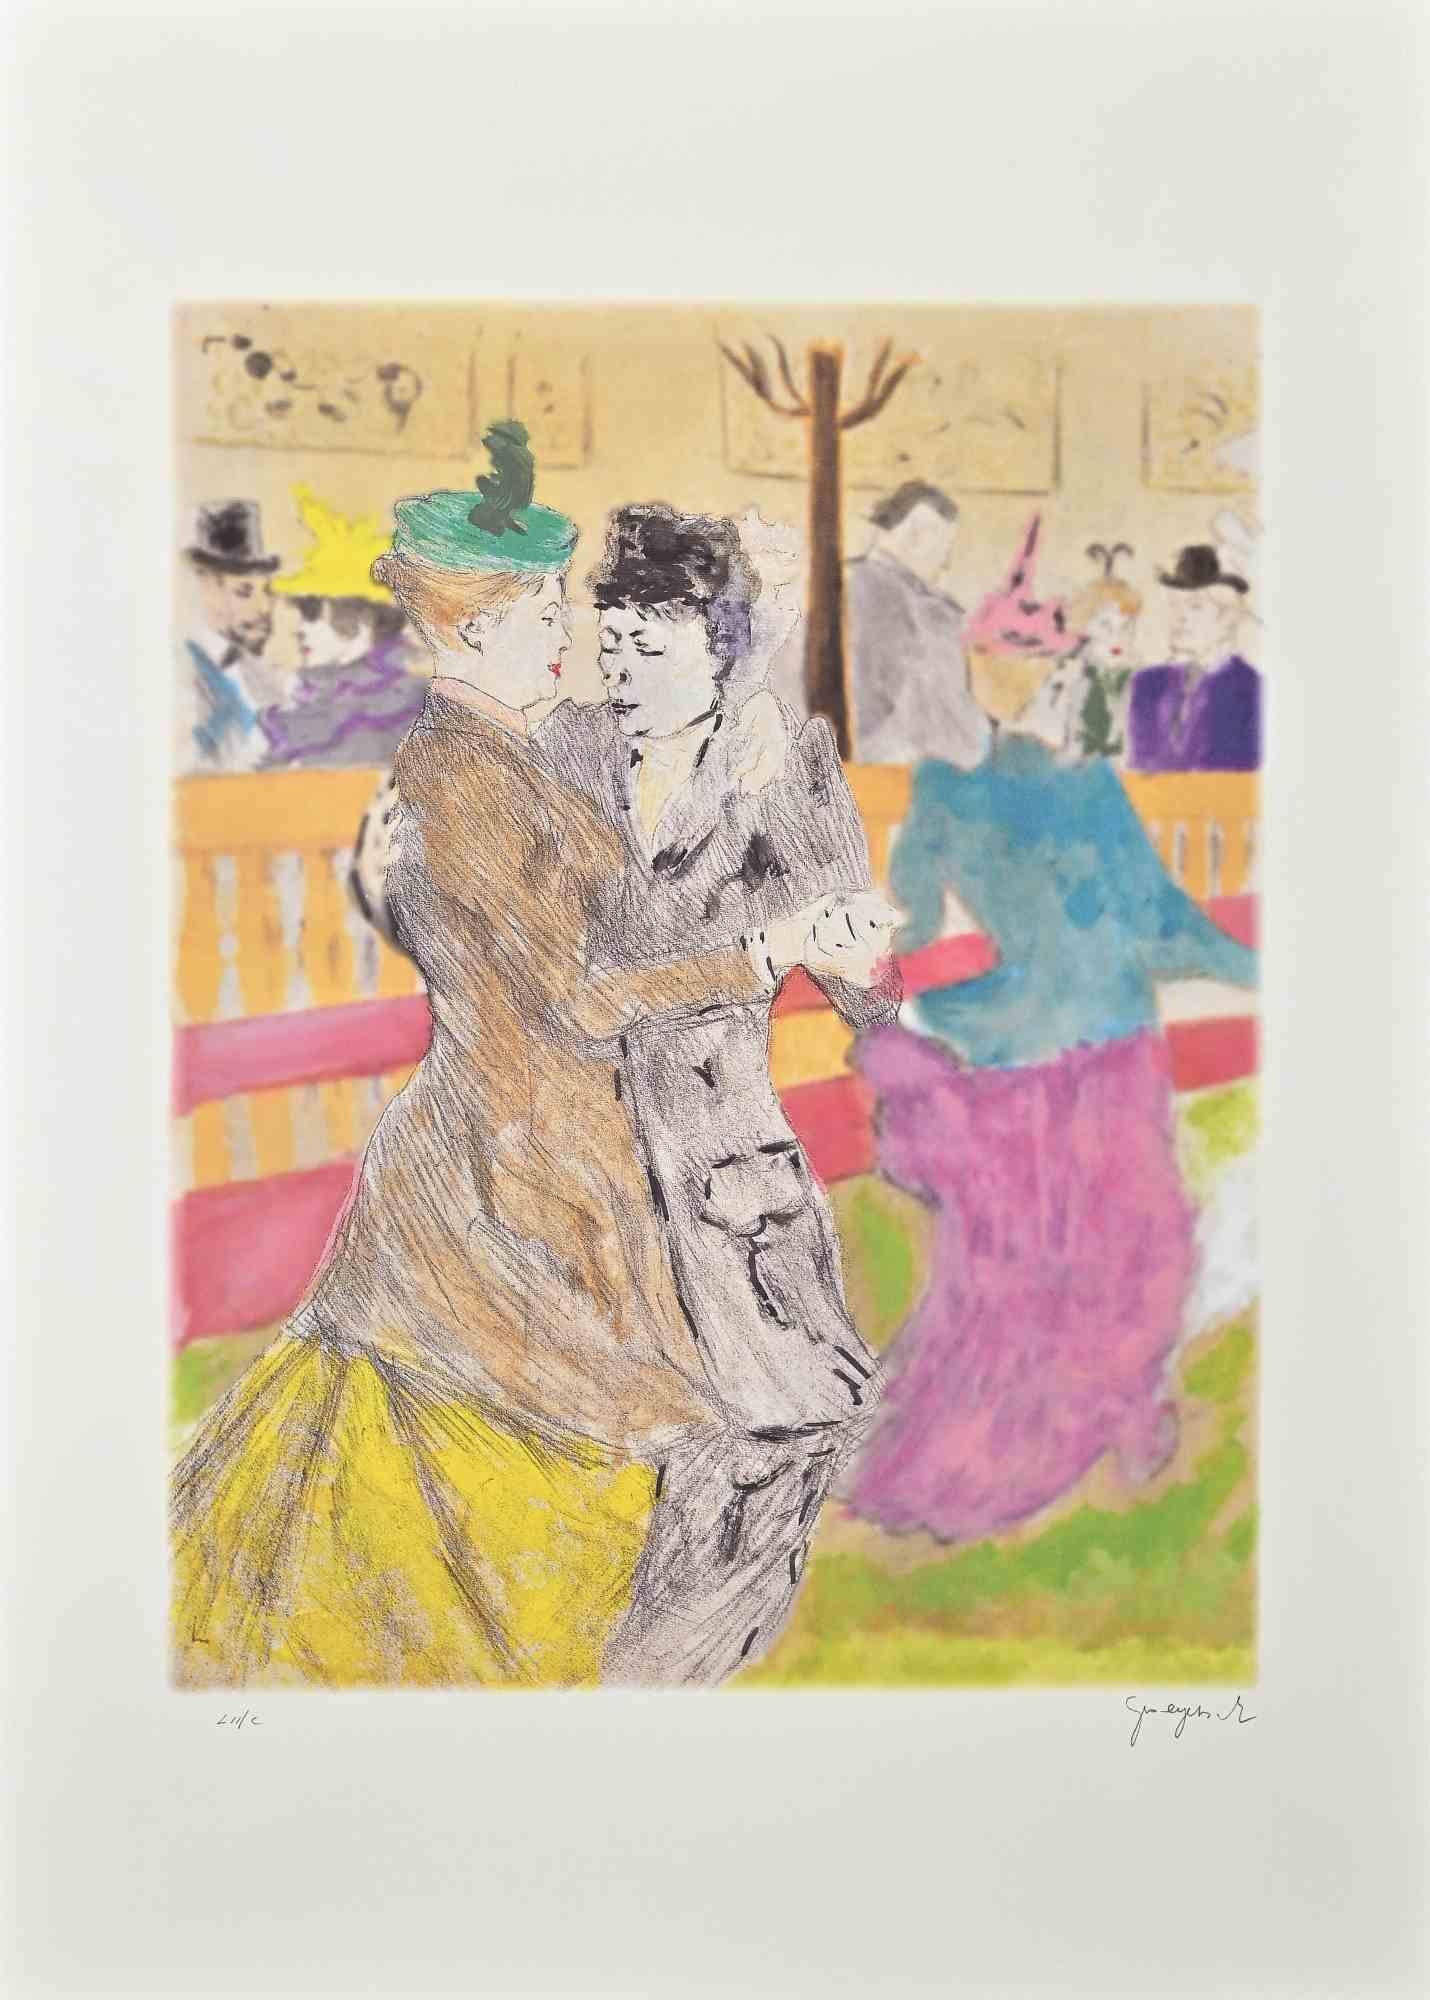 The Dance is an original colored lithograph print, hand retouched realized by the Belgian artist Martine Goeyens.

On the back, the label of the certificate of authenticity by the "Fondazione Di Paolo".

Hand-signed on the lower right in